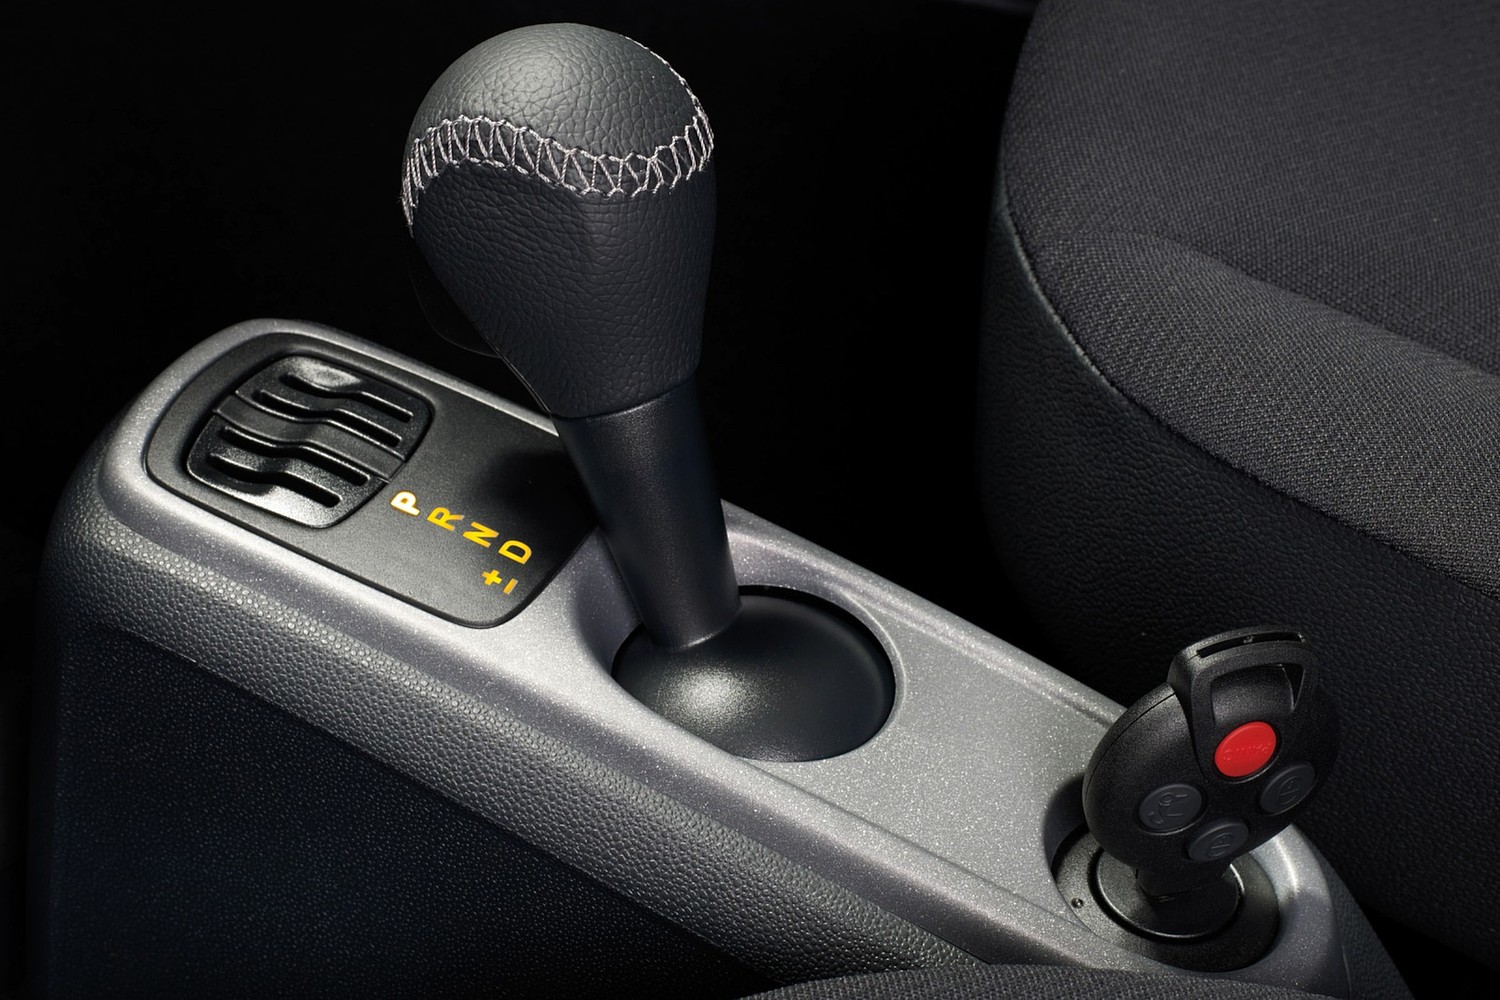 smart fortwo pure coupe 2dr Hatchback Shifter (2013 model year shown)